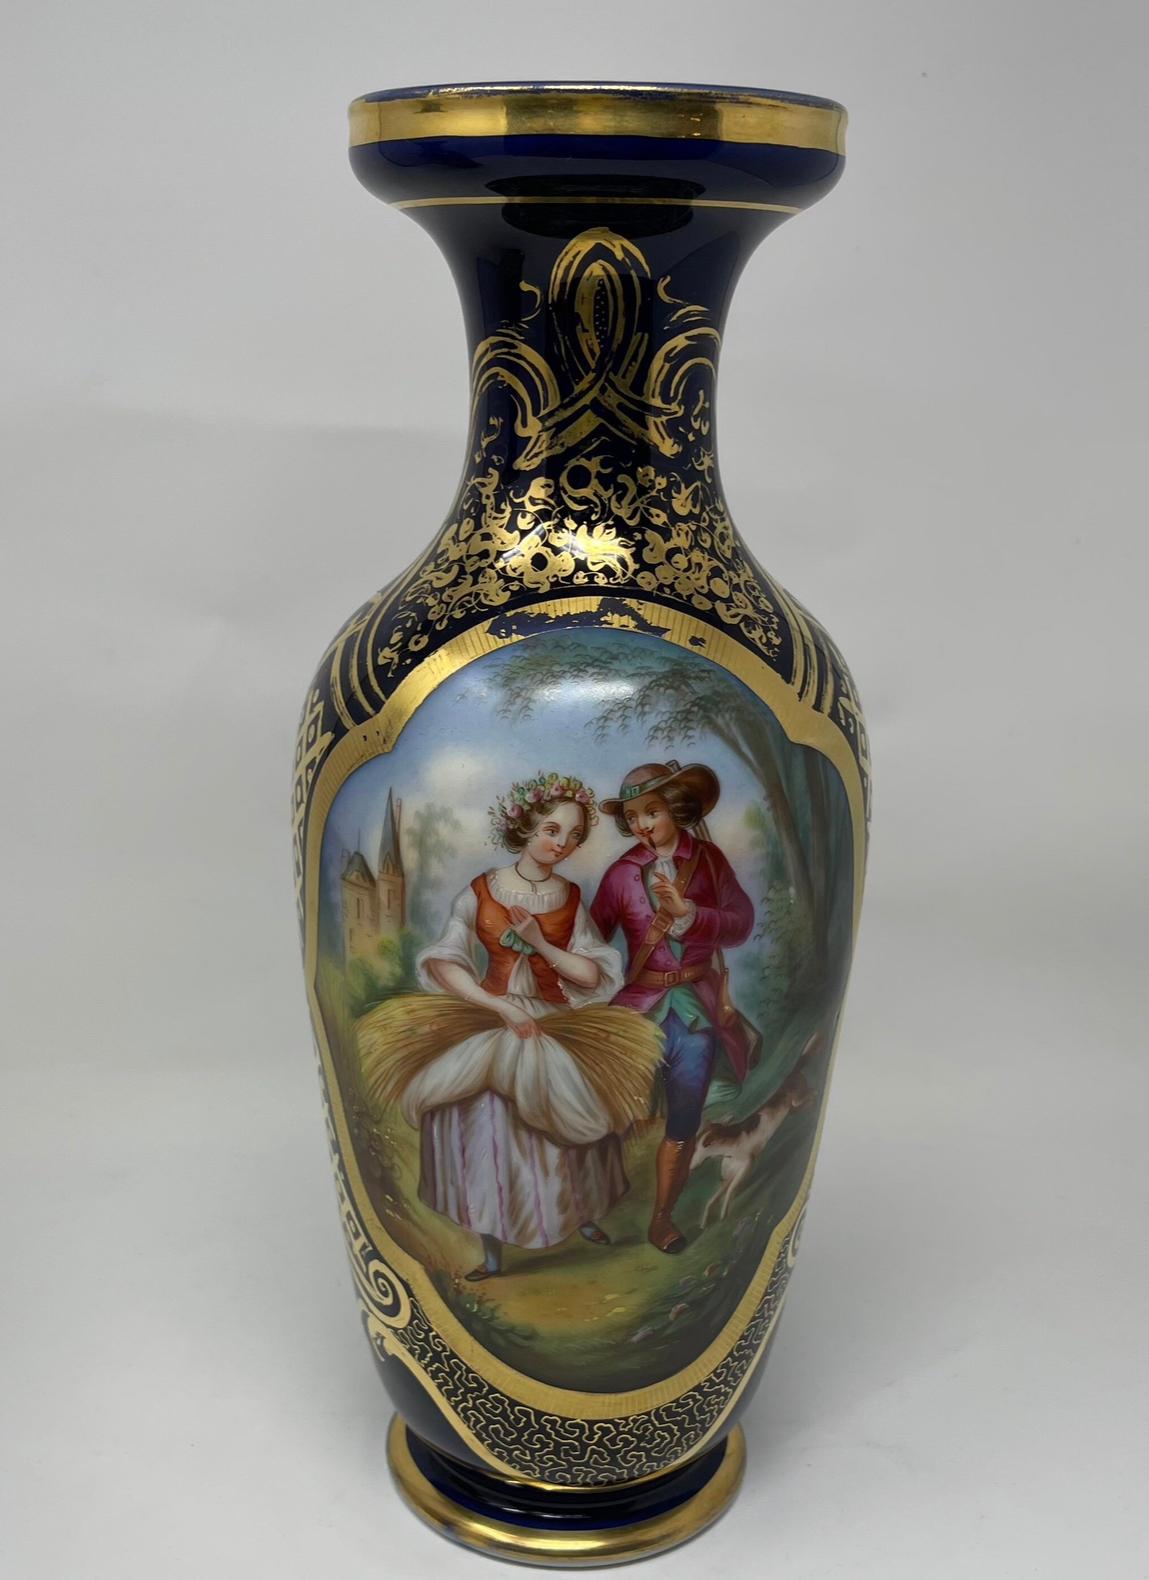 Antique French Old Paris Gilded Porcelain Vases with Hand Painted Courting Scenes - Pair

This beautiful pair of Porcelain Gilded Vases from France have a hand painted courting scenes. Both painted in a beautiful cobalt blue and has gold accents.